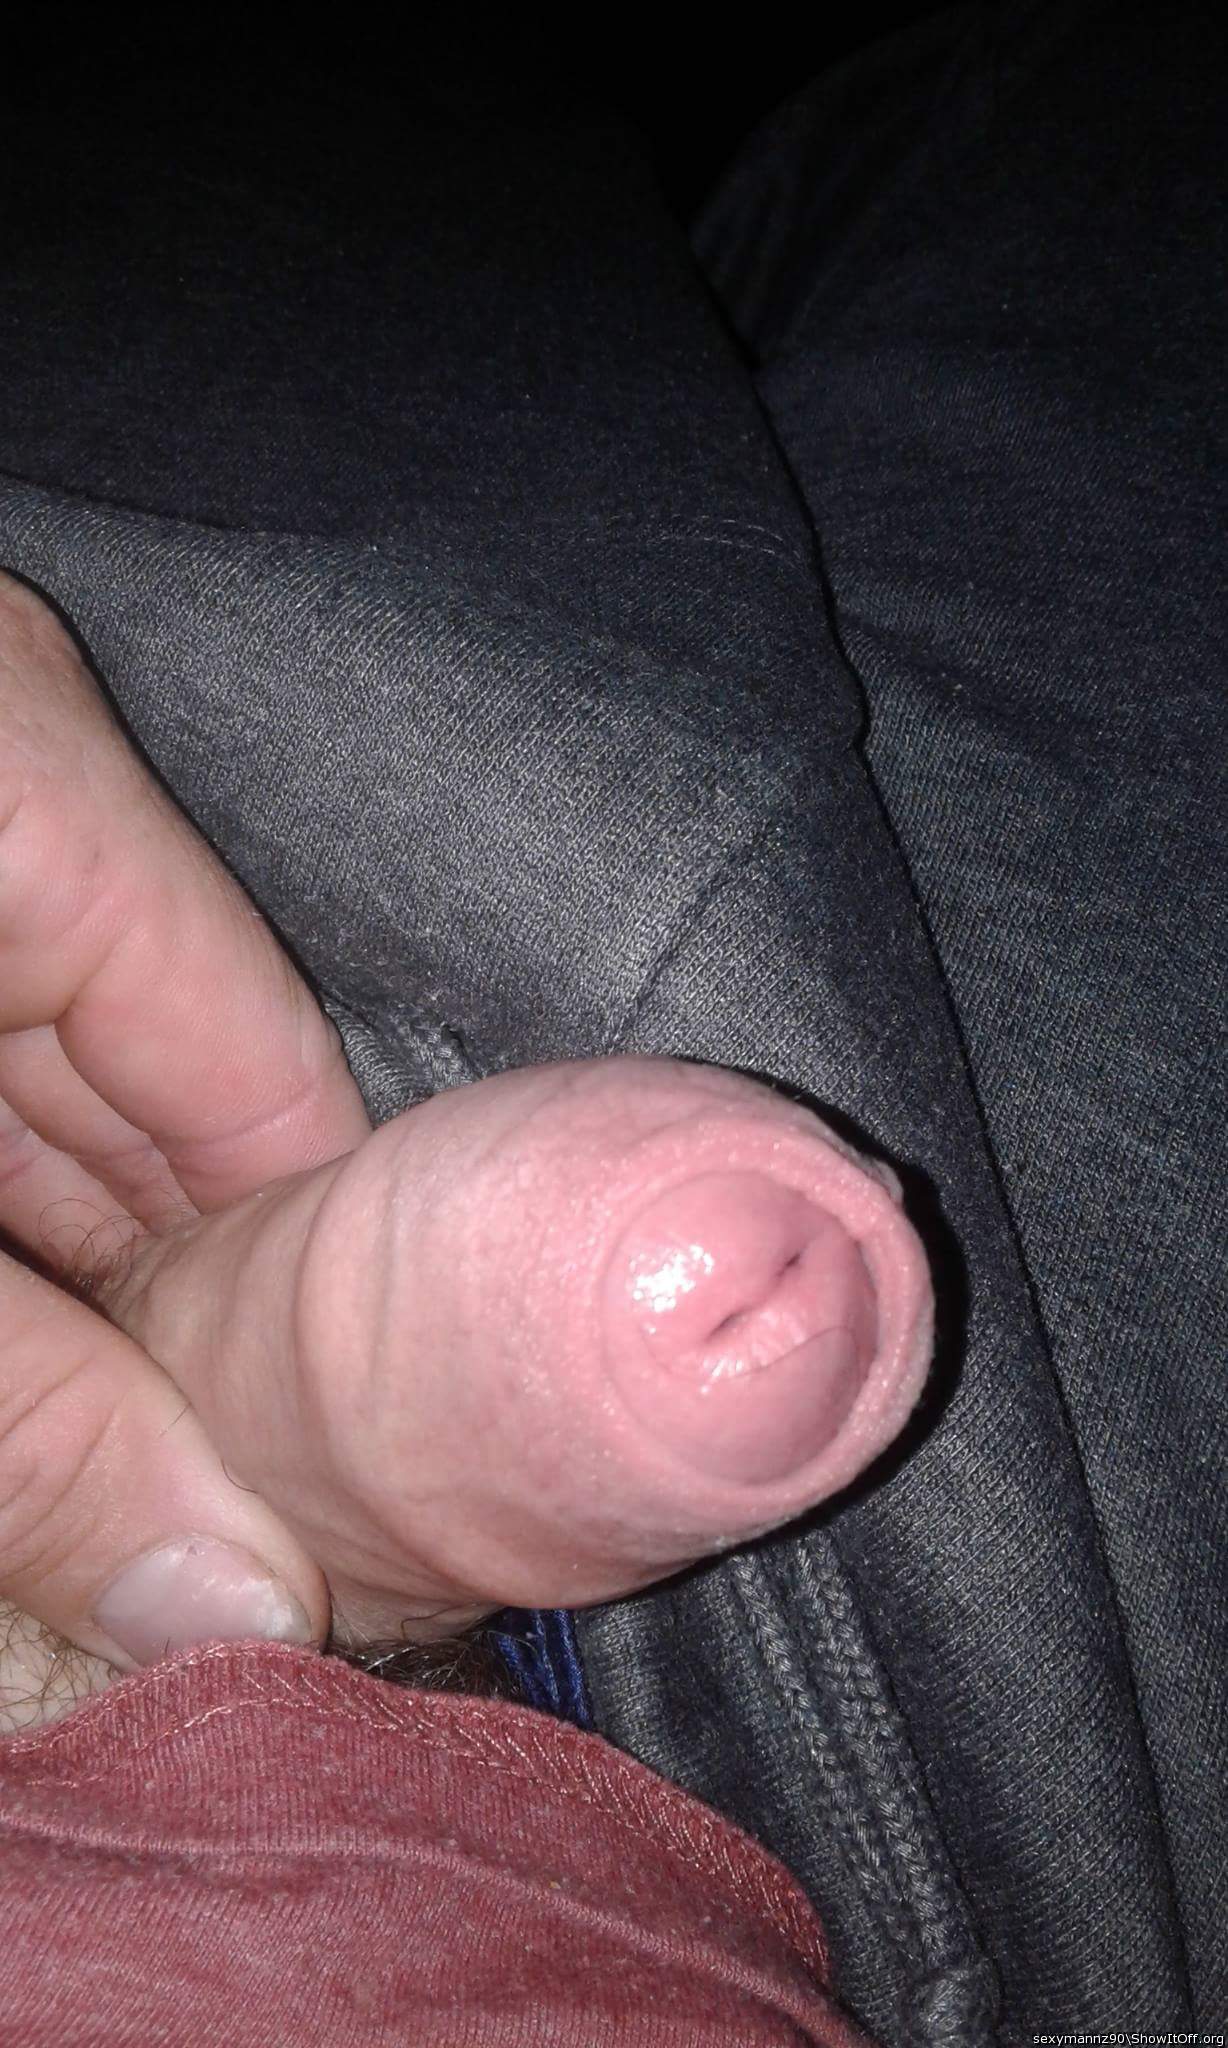 Photo of a sausage from Sexymannz90